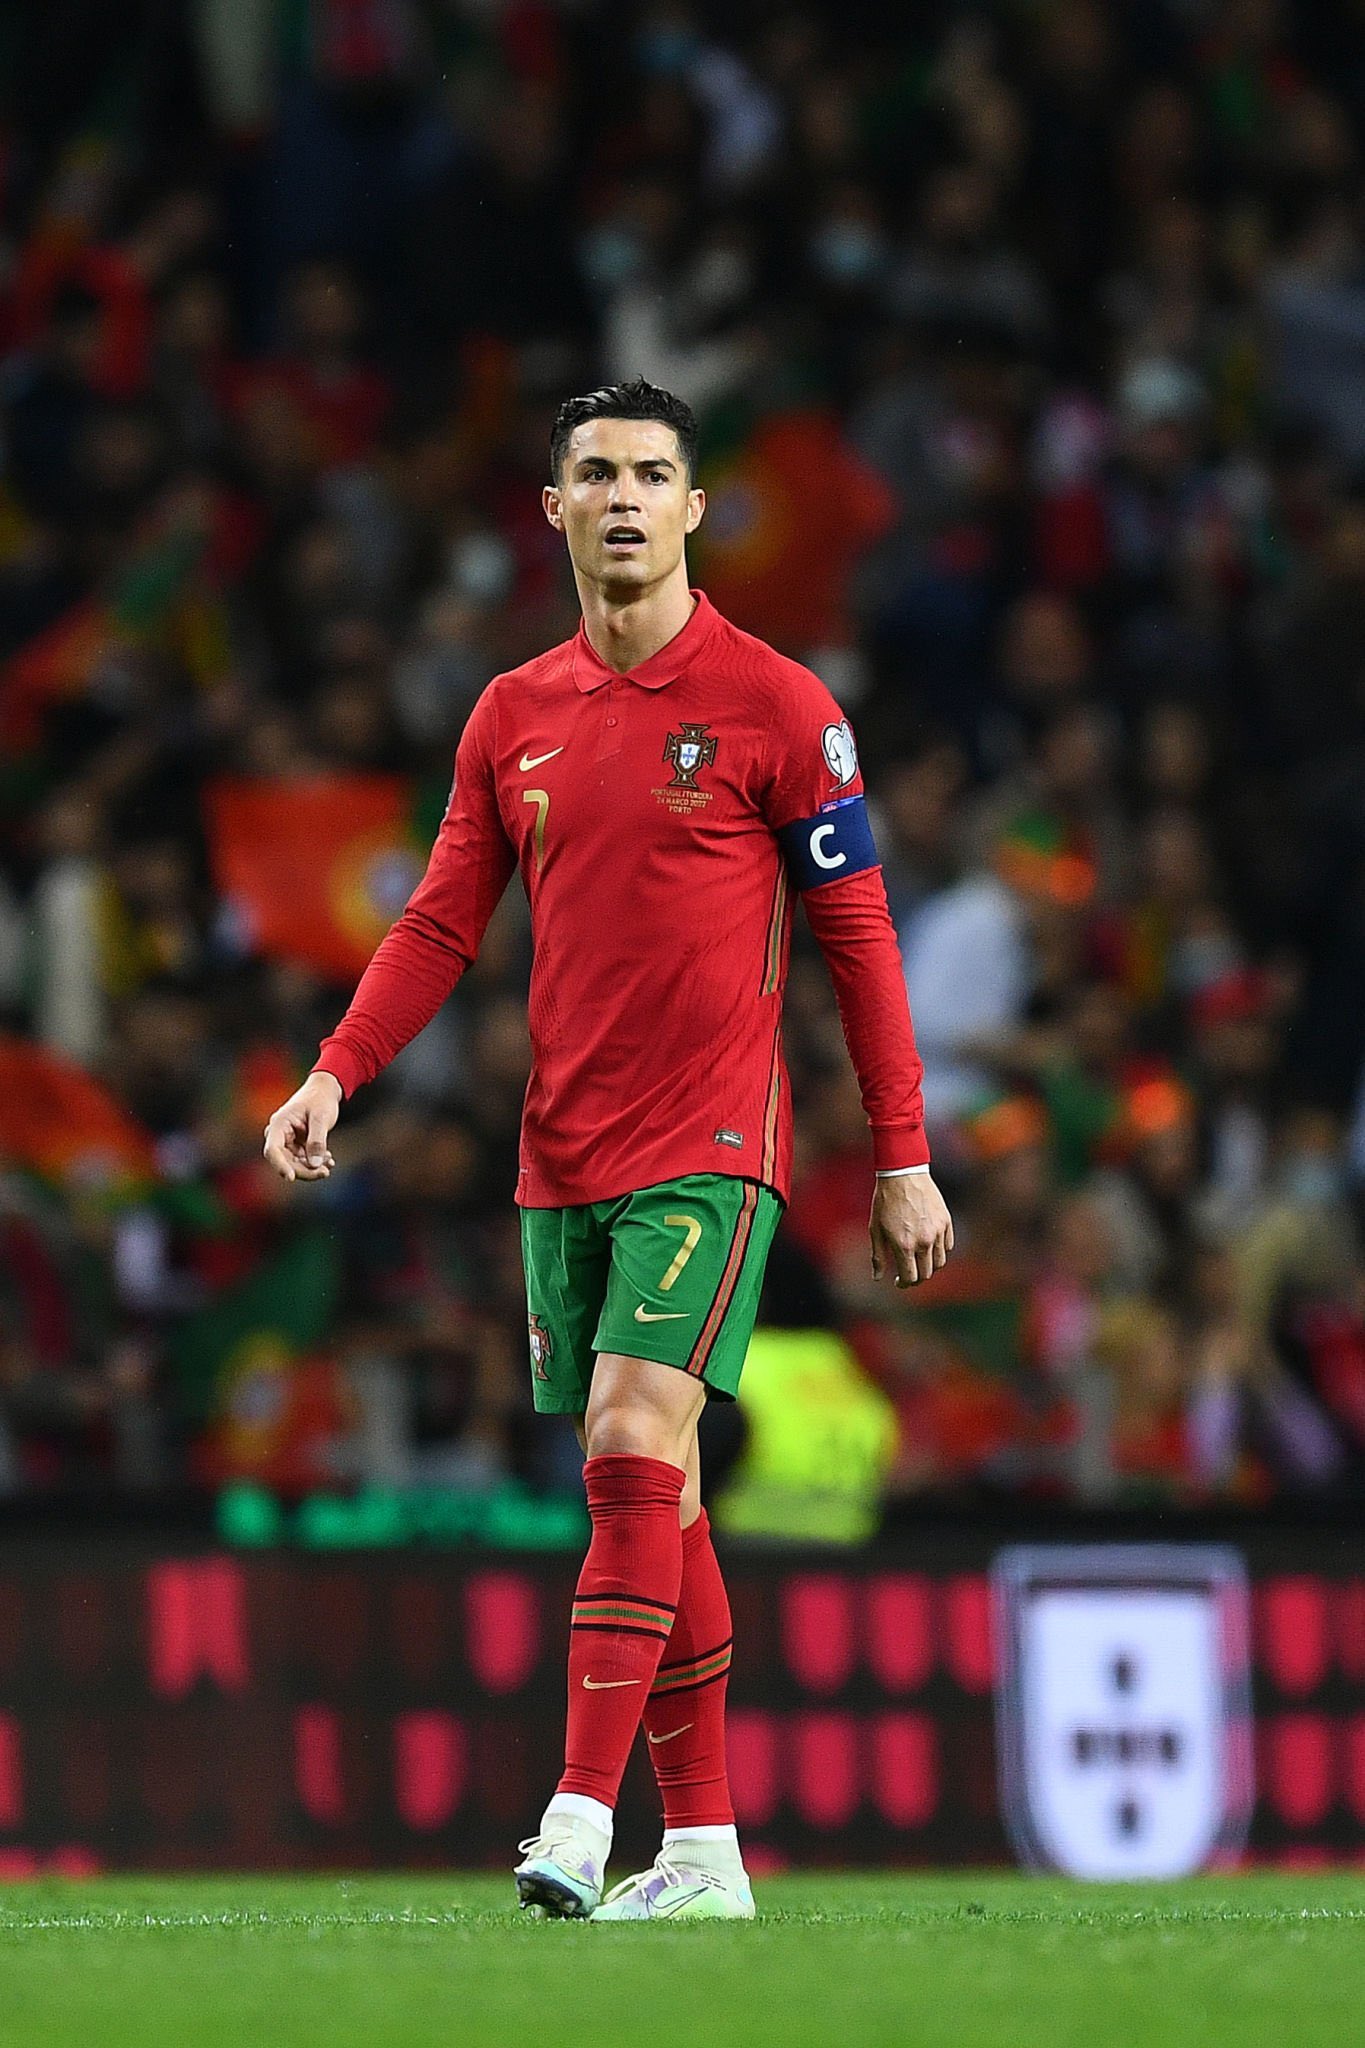 The CR7 Timeline. Ronaldo in the FIFA World Cup Qualifiers: 46 matches